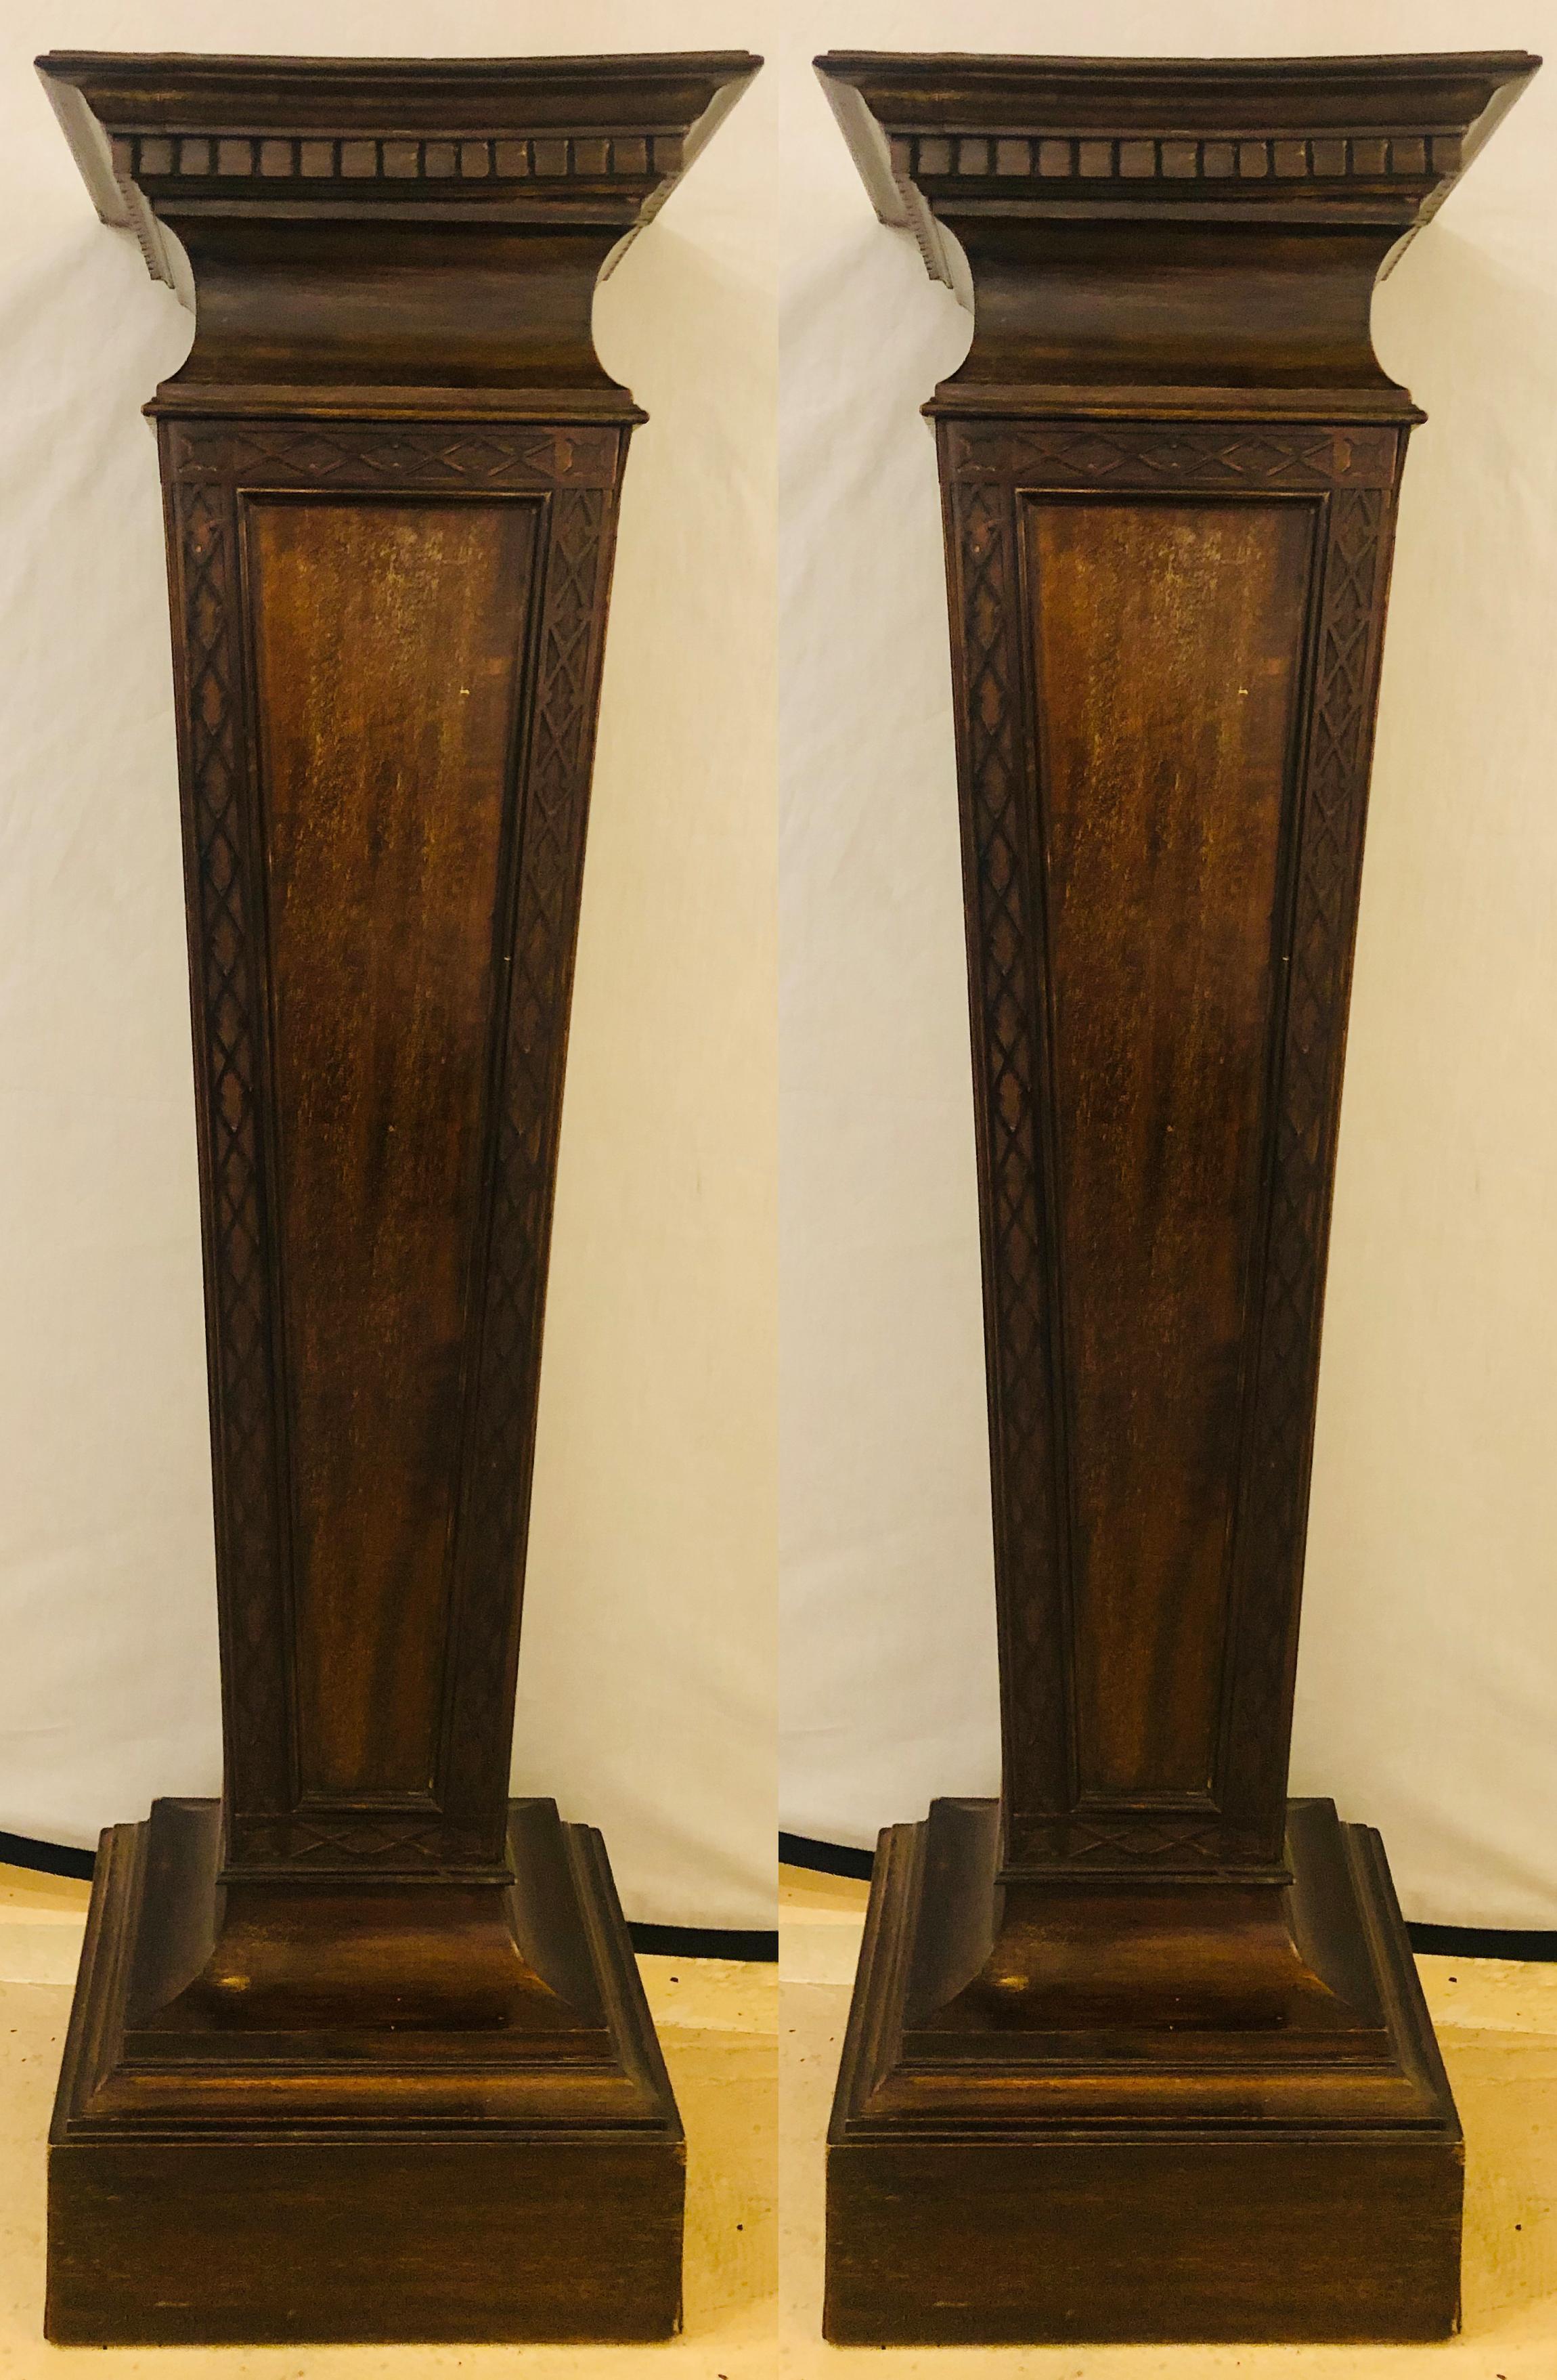 Pair of mahogany Empire style wooden pedestals. These large and impressive wooden pedestals are finely carved in their walnut or mahogany frames. 


EXX
Lia.